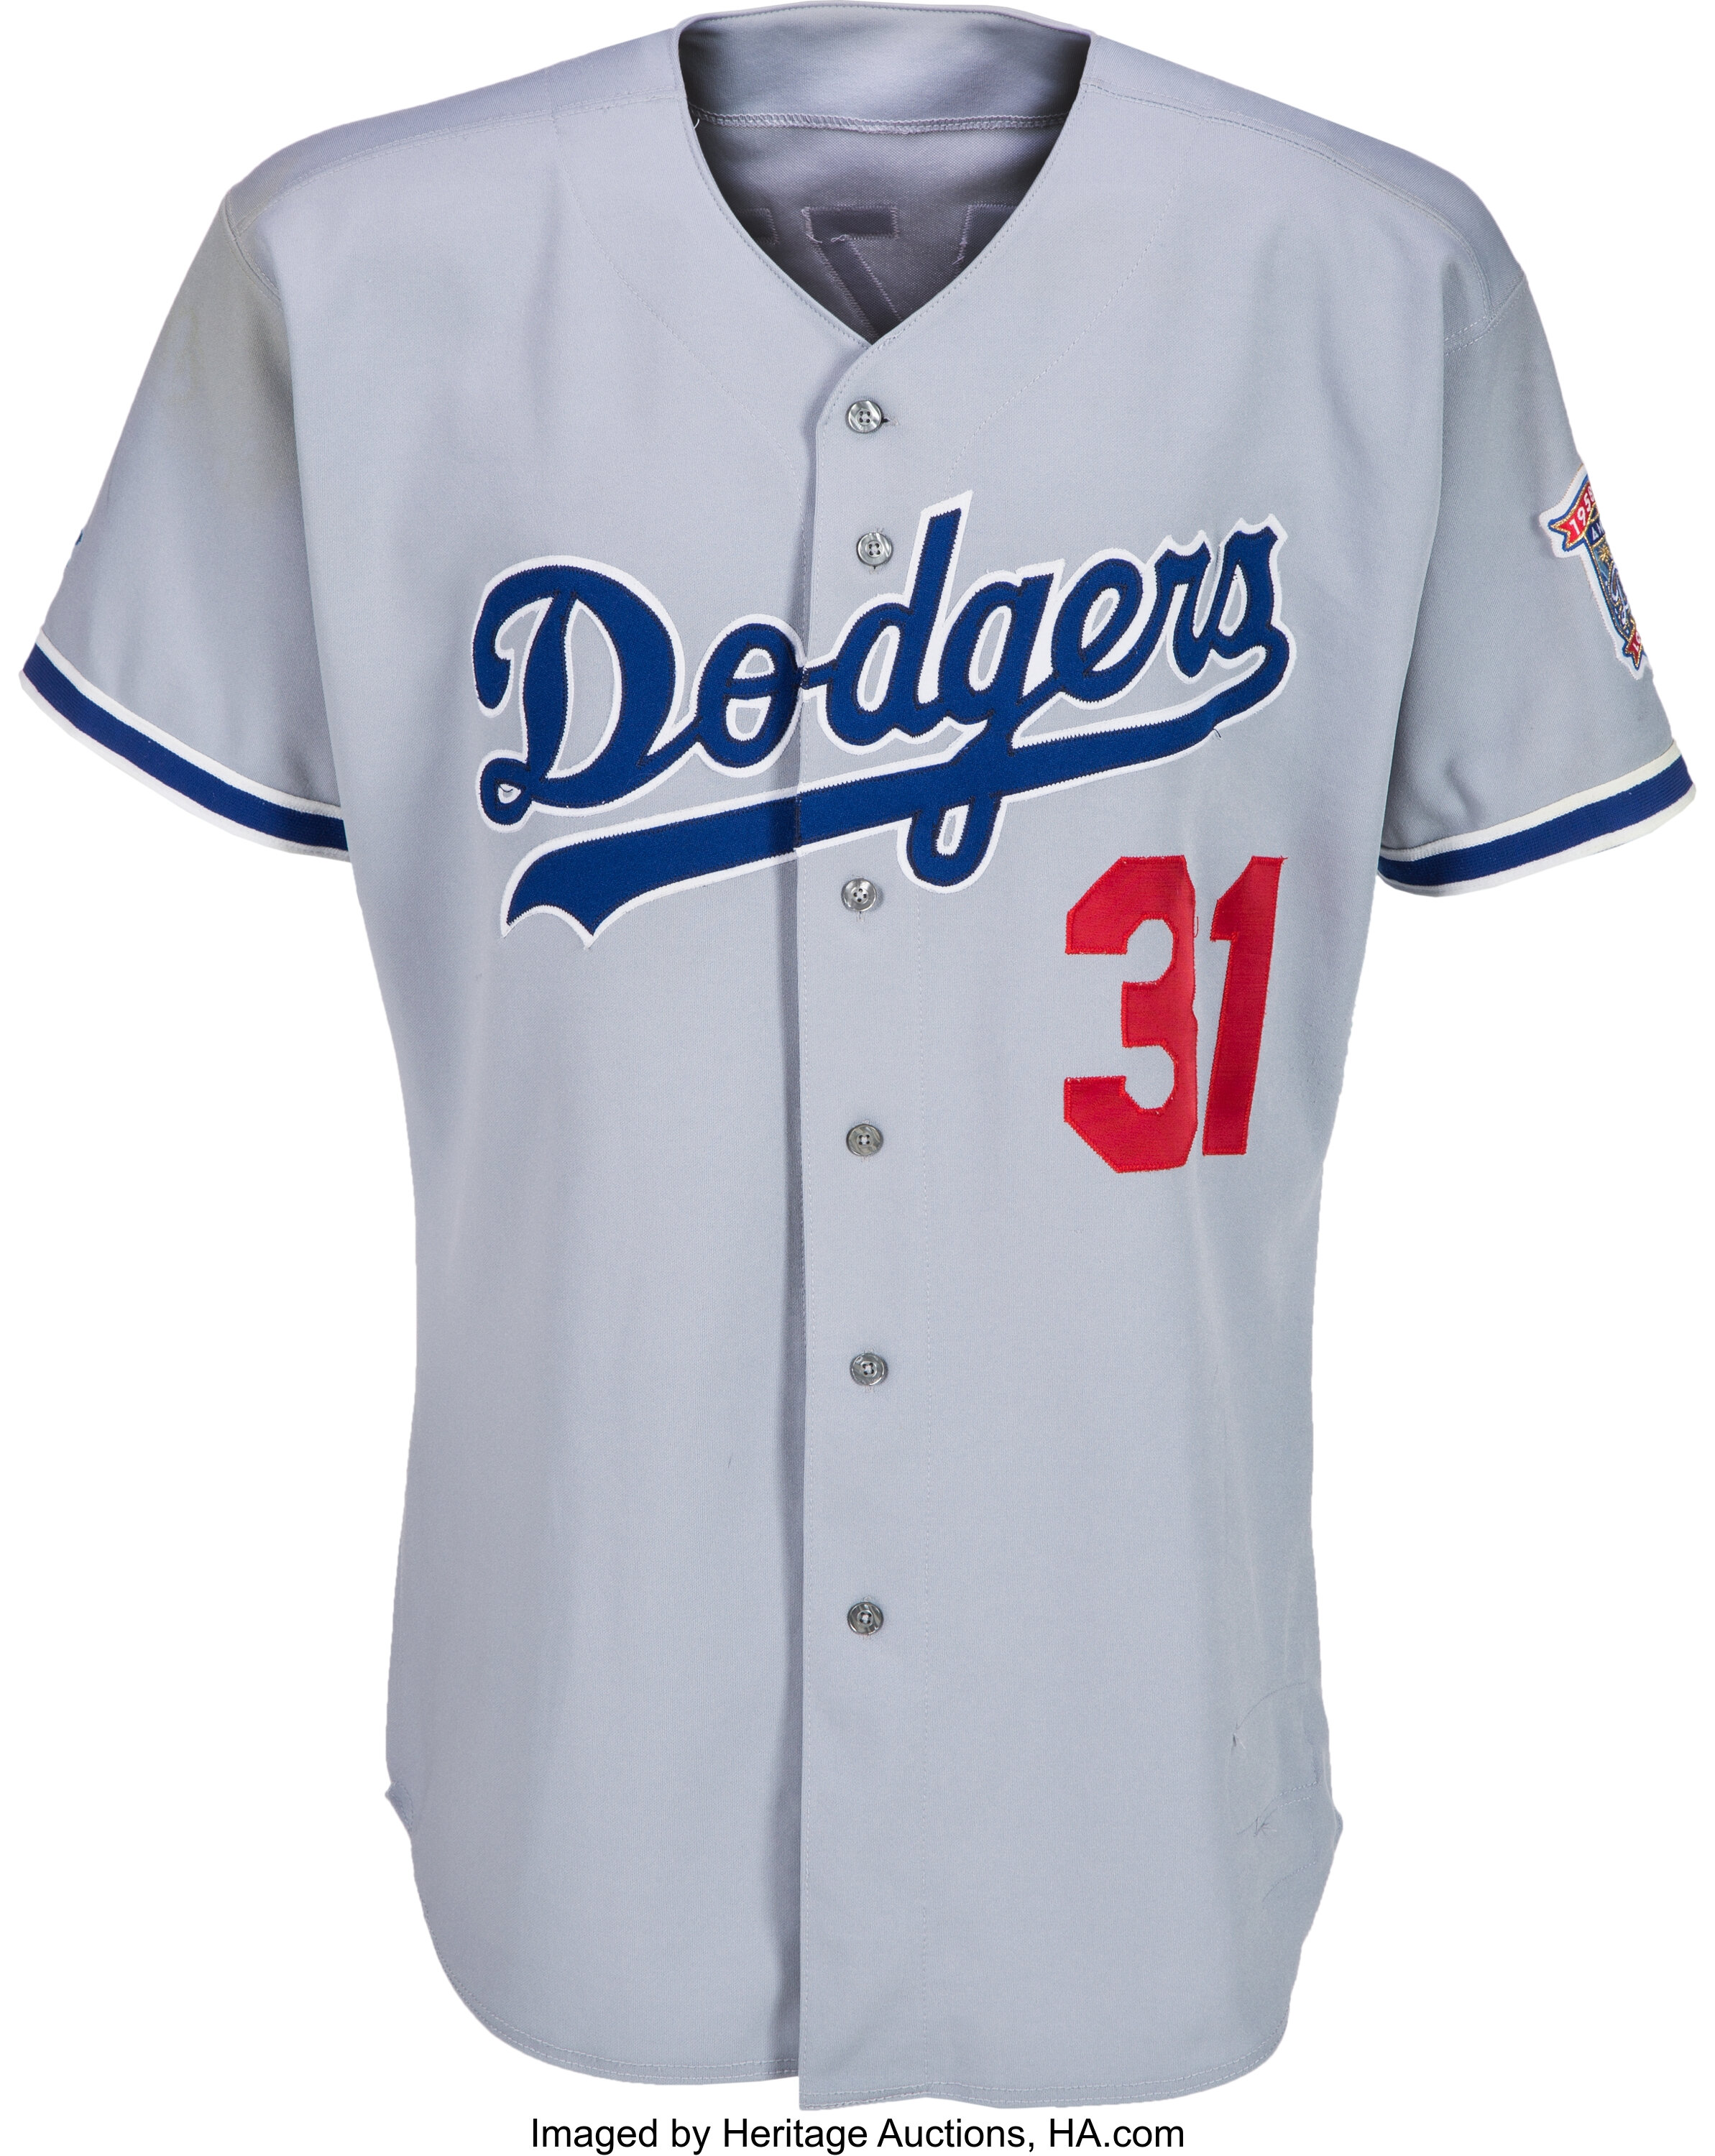 Mike Piazza Signed LA Dodgers Jersey